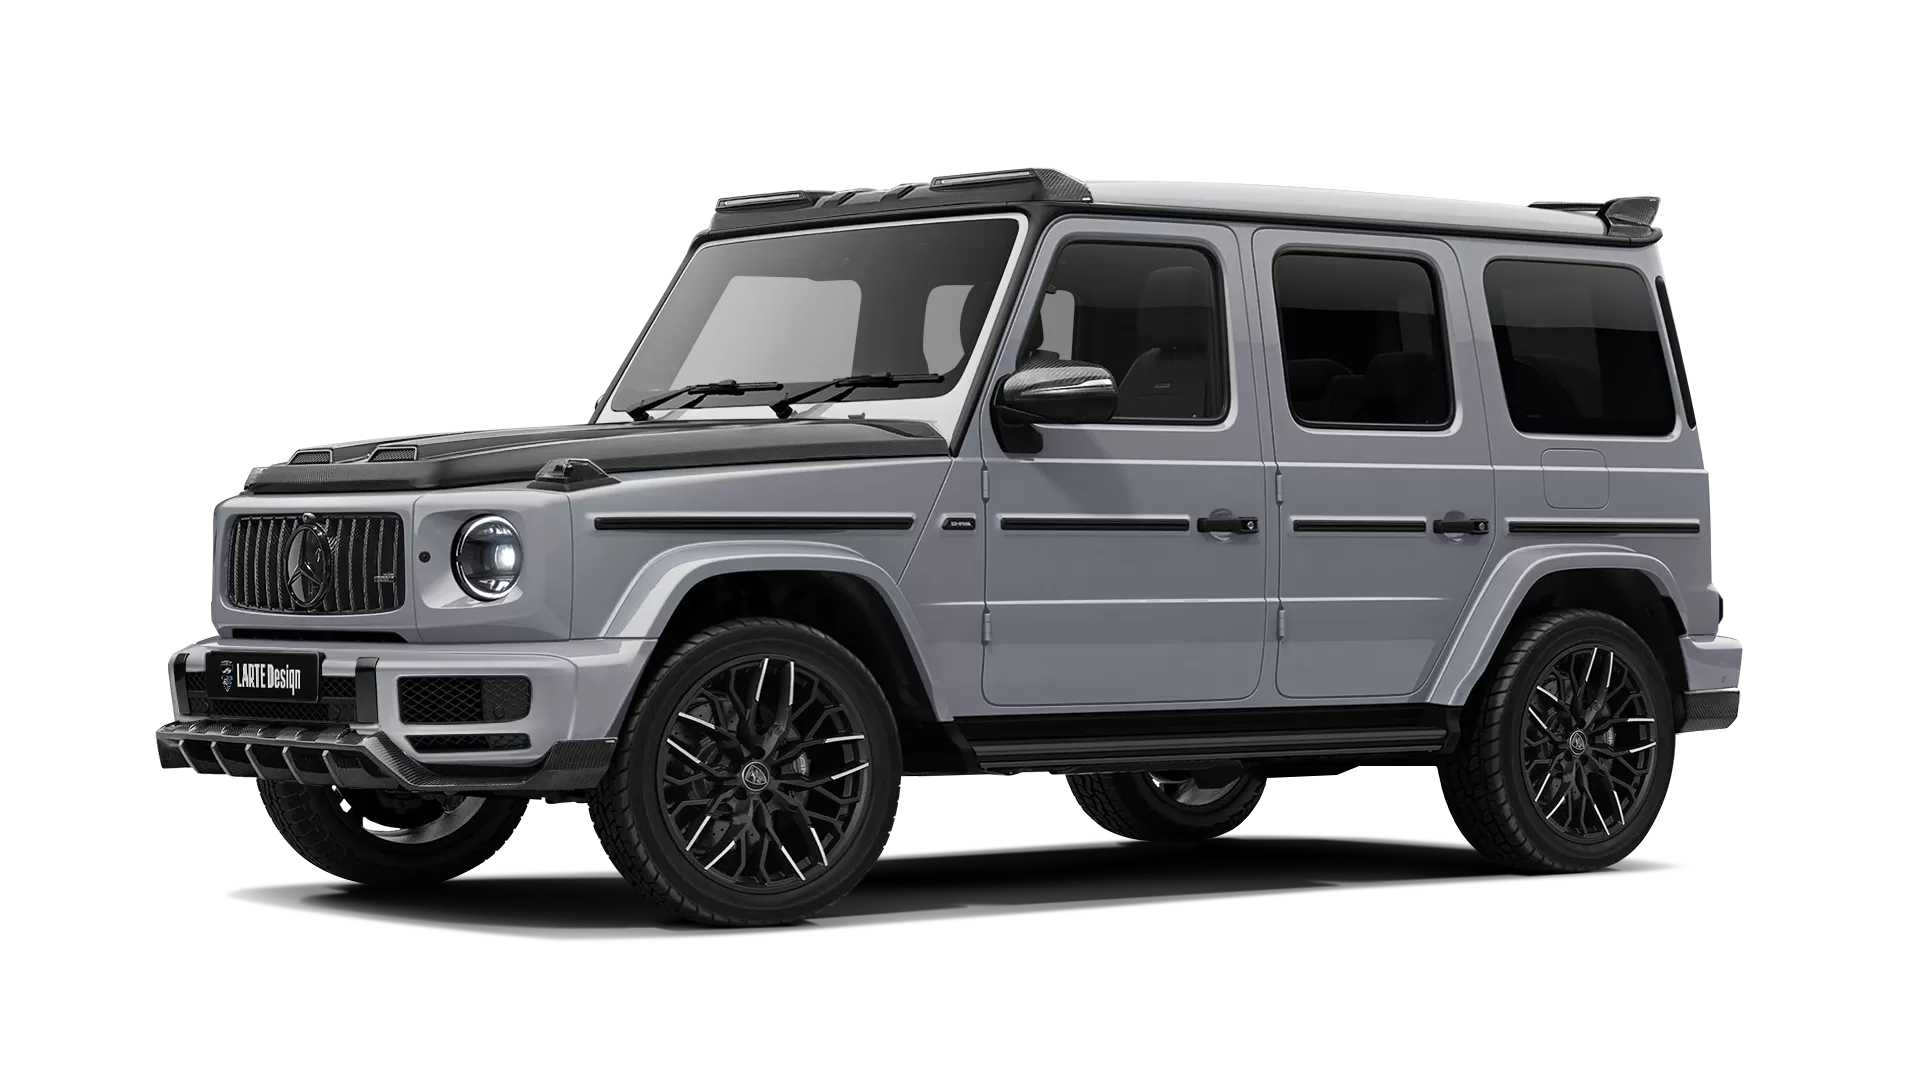 Mercedes G class W463 with carbon body kit: front view shown in Iridium Silver